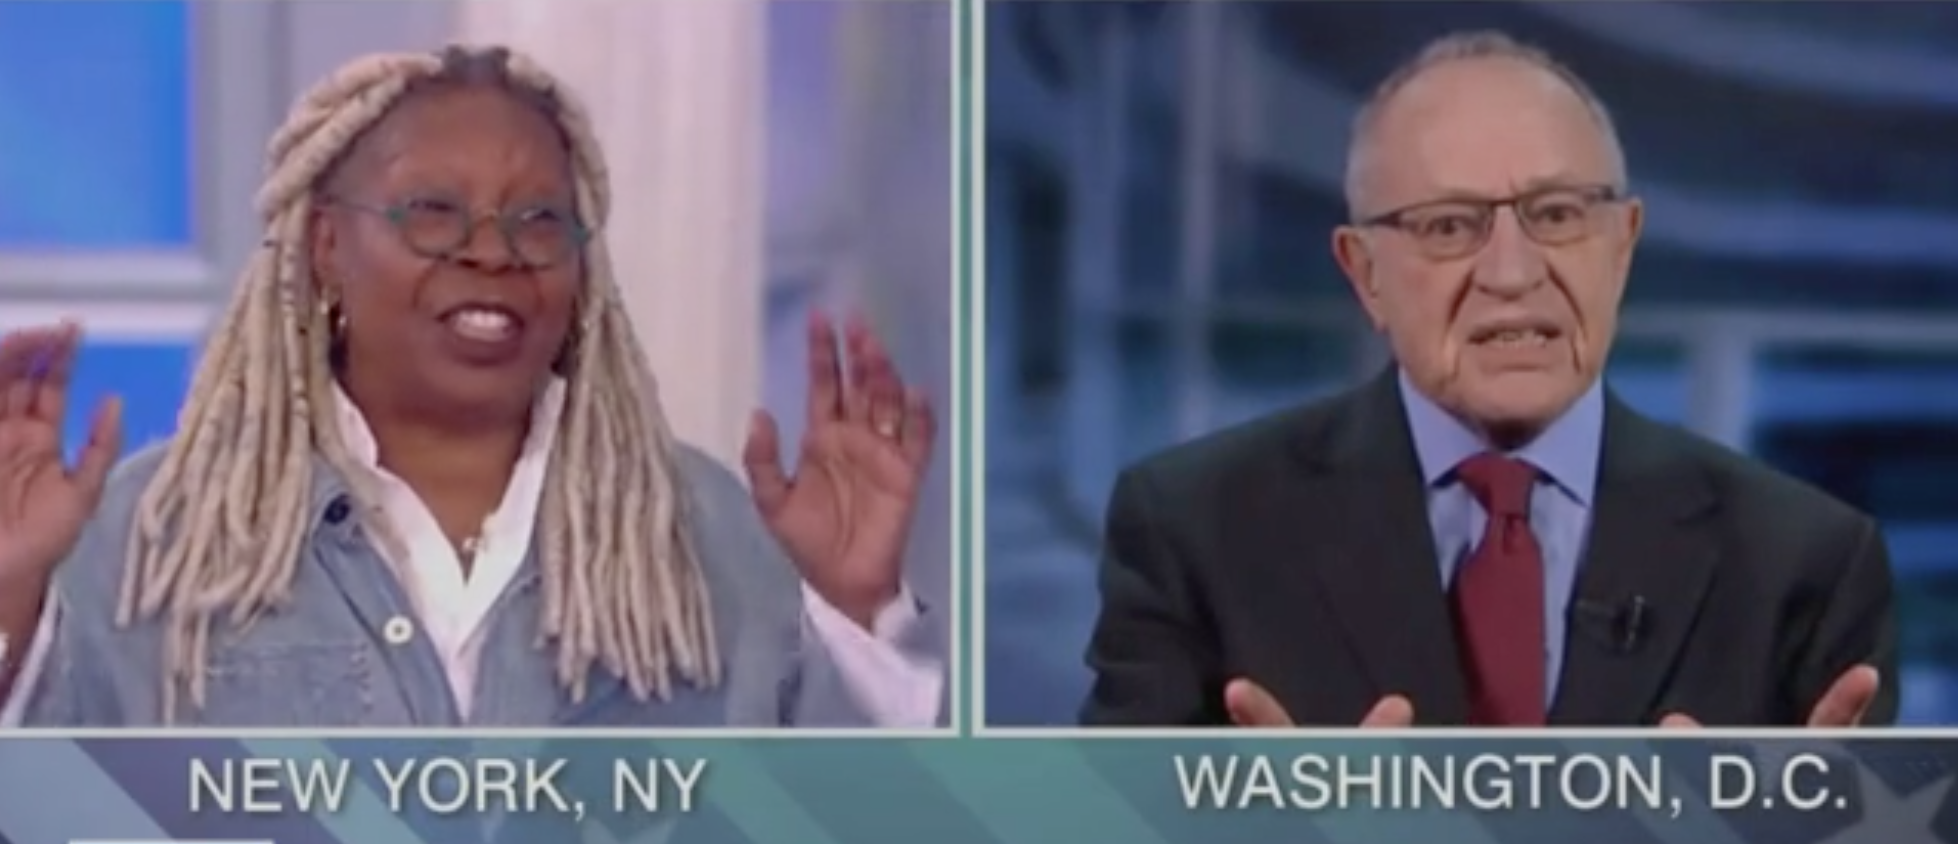 ‘I’m Cutting You Off’: Whoopi Goldberg Mocks And Interrupts Alan Dershowitz, Then Accuses Him Of Disrespect